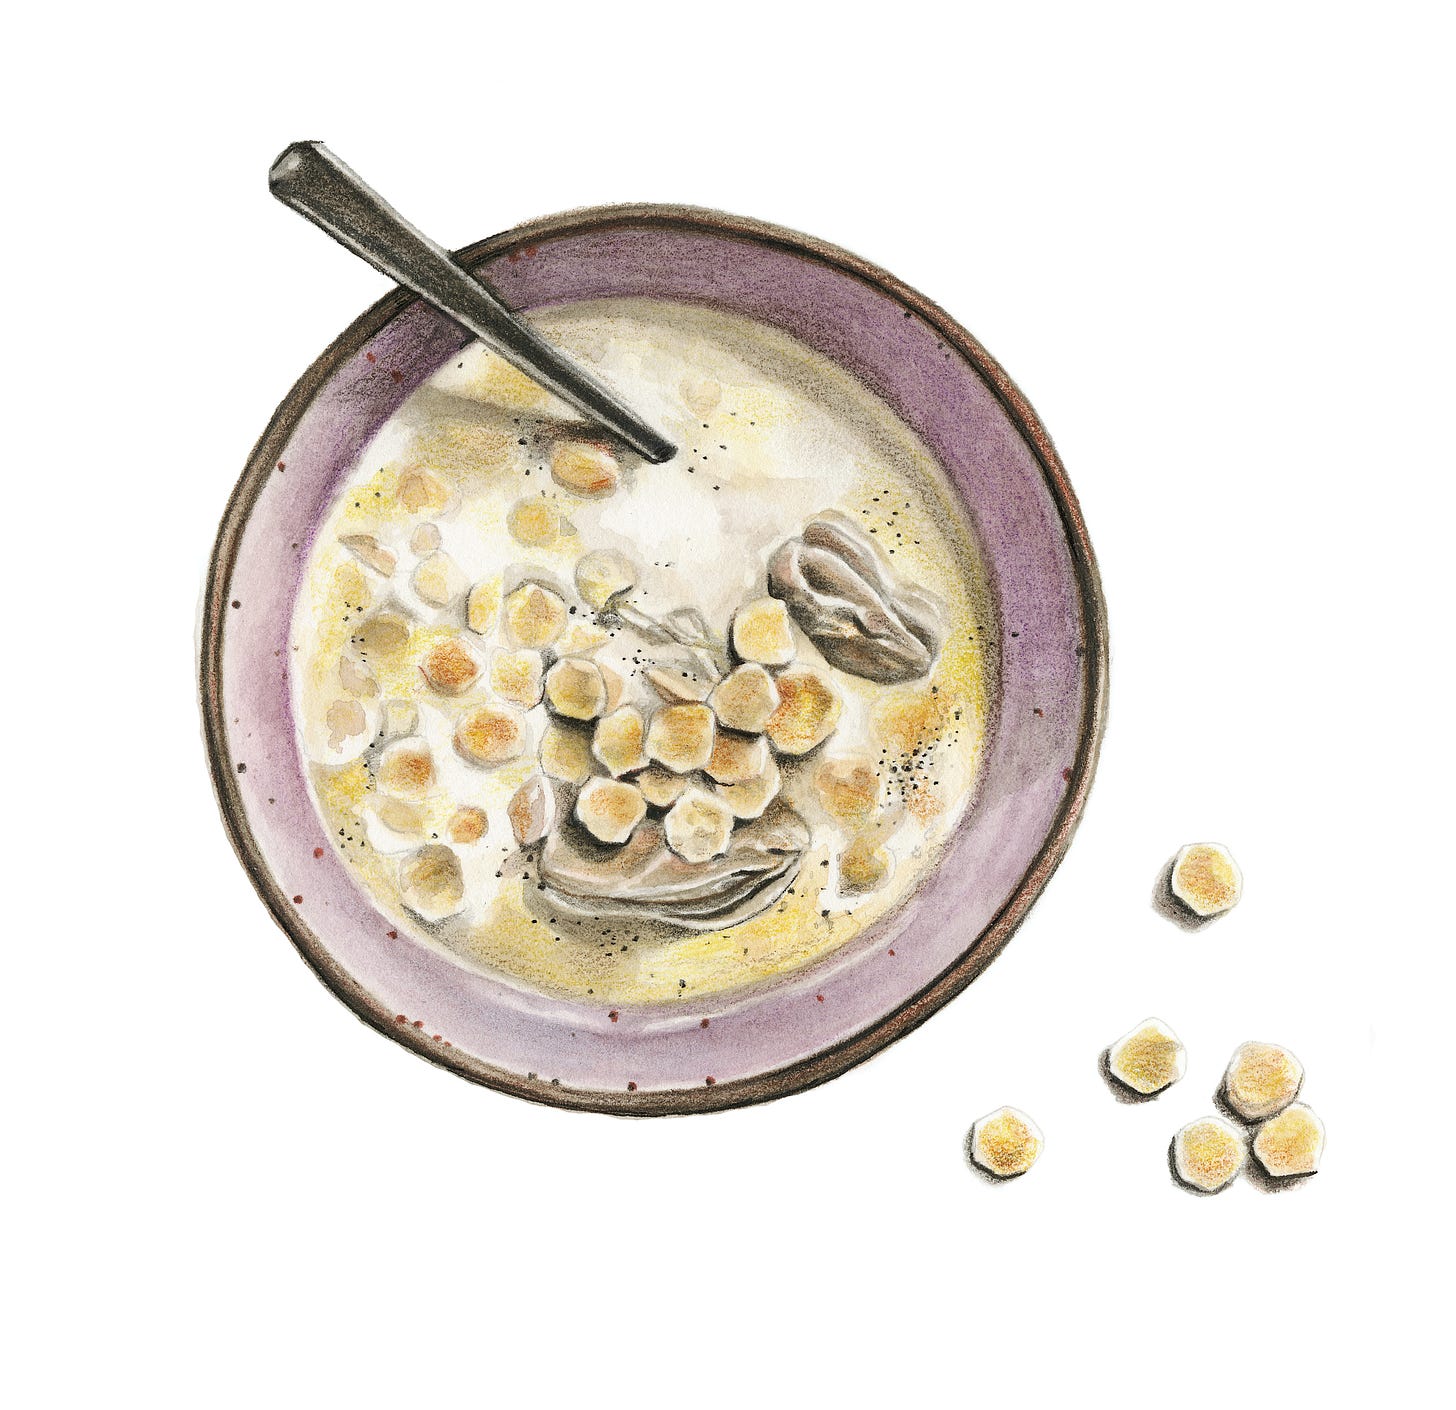 watercolor of oyster stew in a bowl